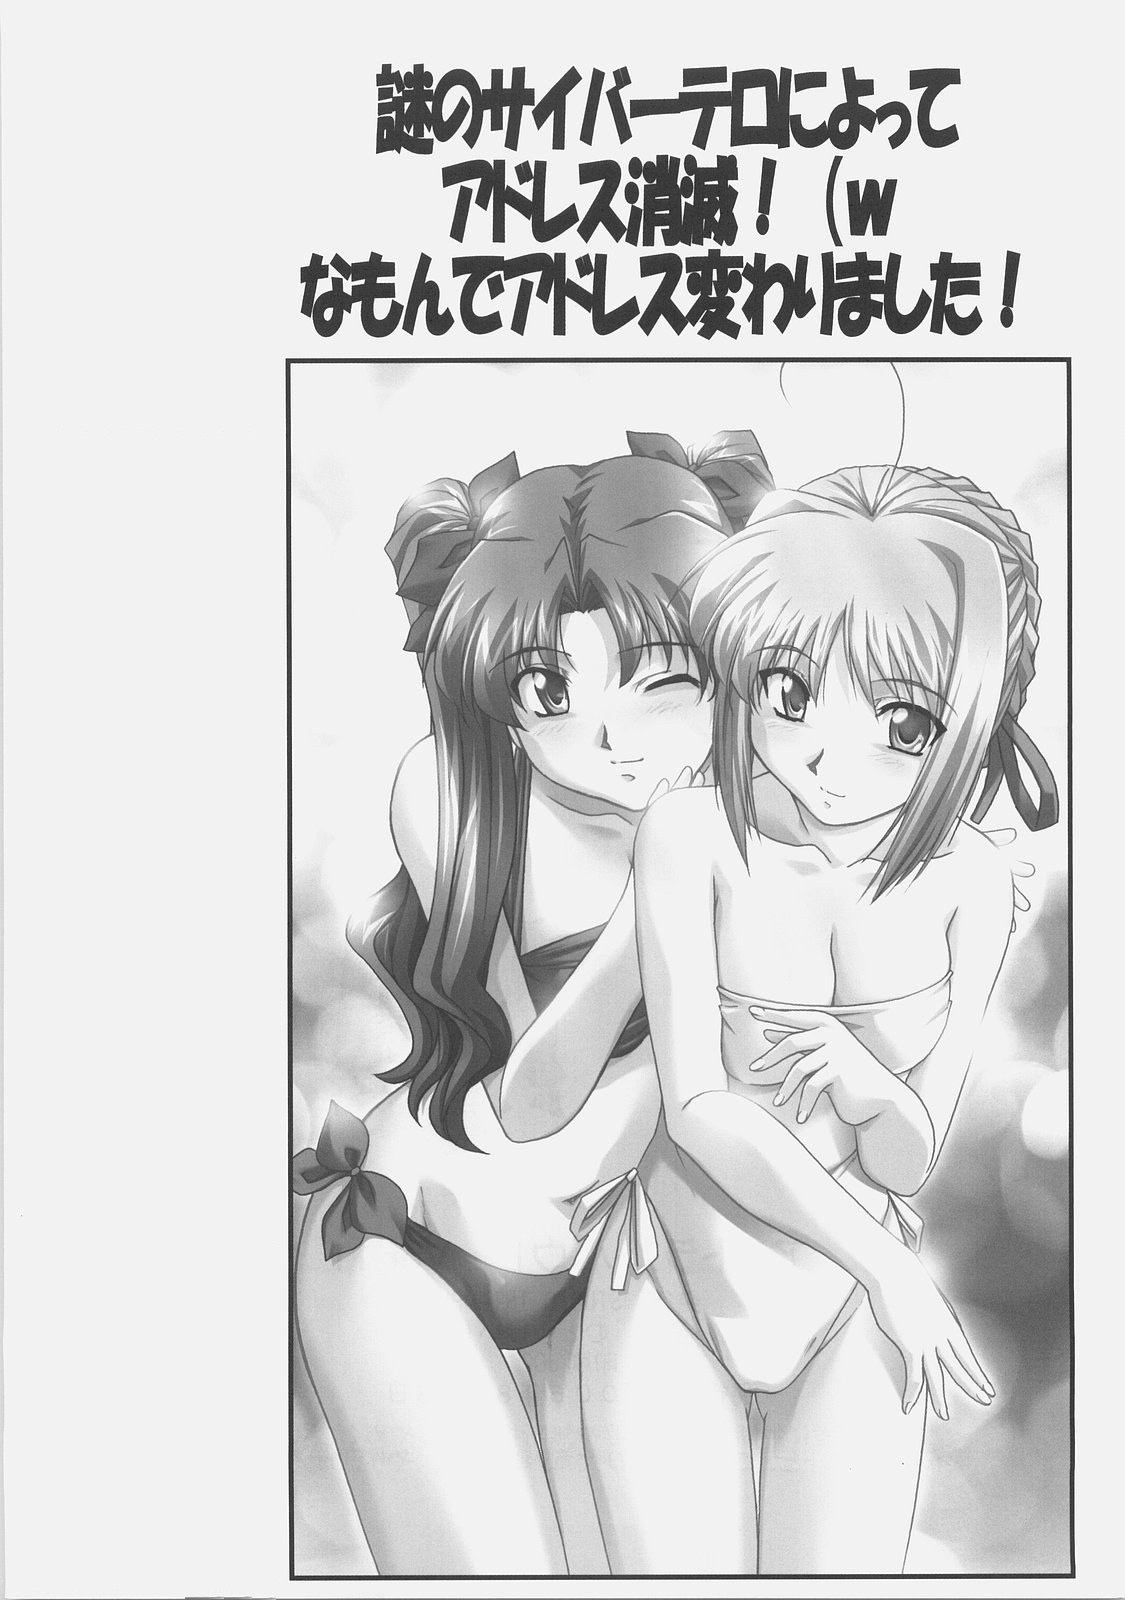 (C70) [STUDIO TRIUMPH (Mutou Keiji)] Astral Bout Ver. 11 (Fate/stay night) page 24 full